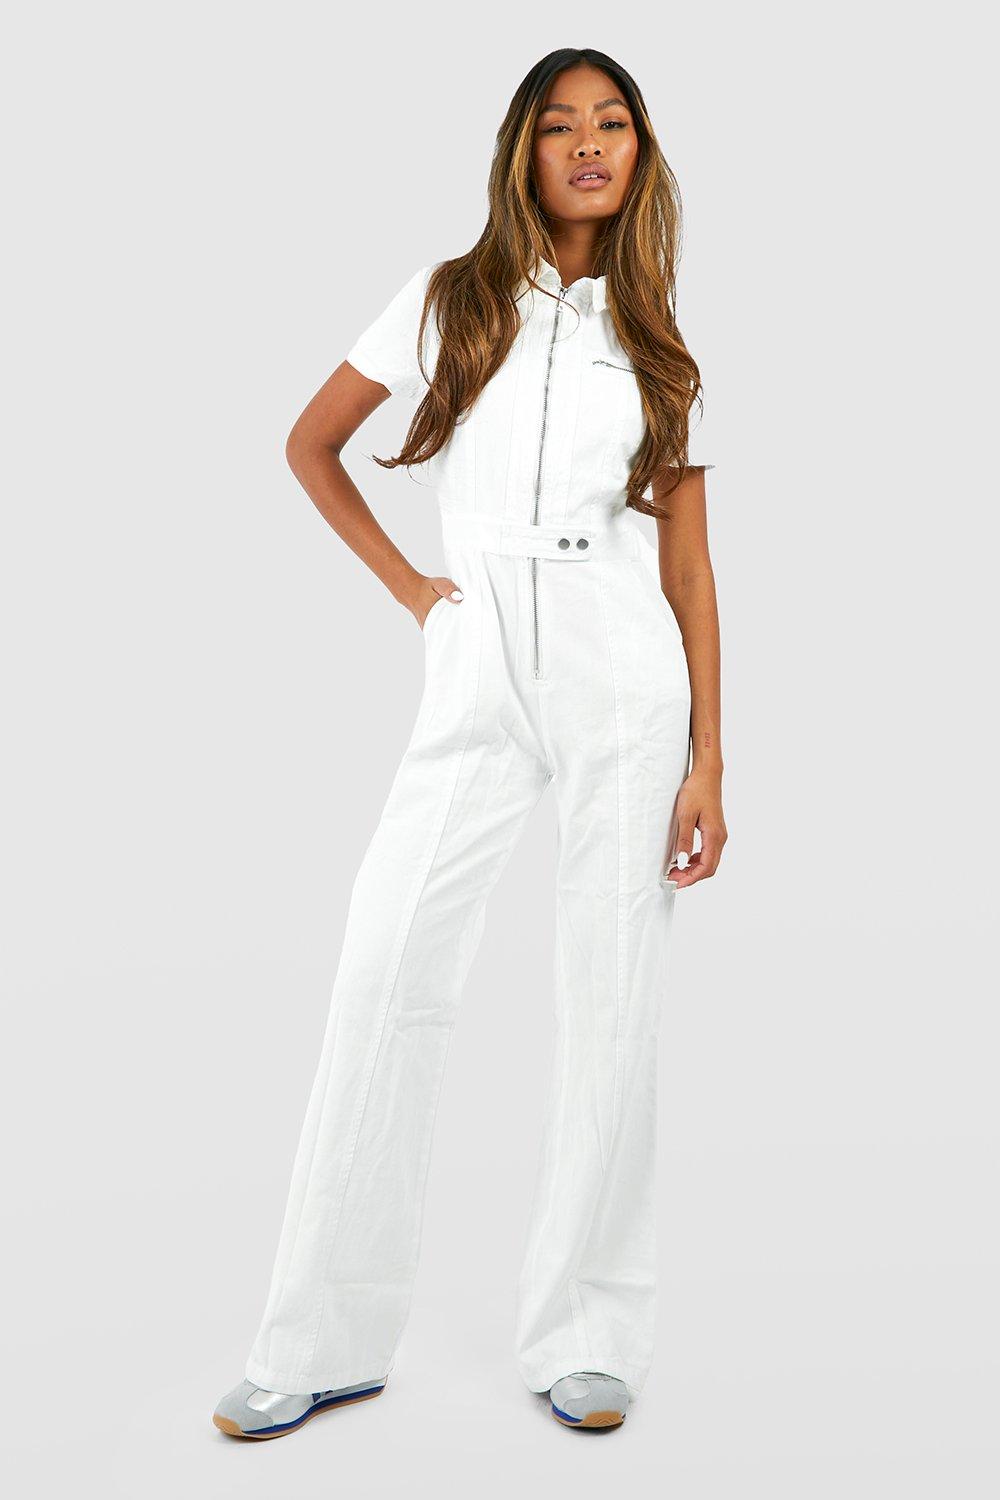 Snapklik.com : White Overalls For Women Baggy Overalls Women Denim Jumpsuit  Jean Romper Overall For Women Denim Outfit Color Brilliant White Size Small  Size 4 Size 6